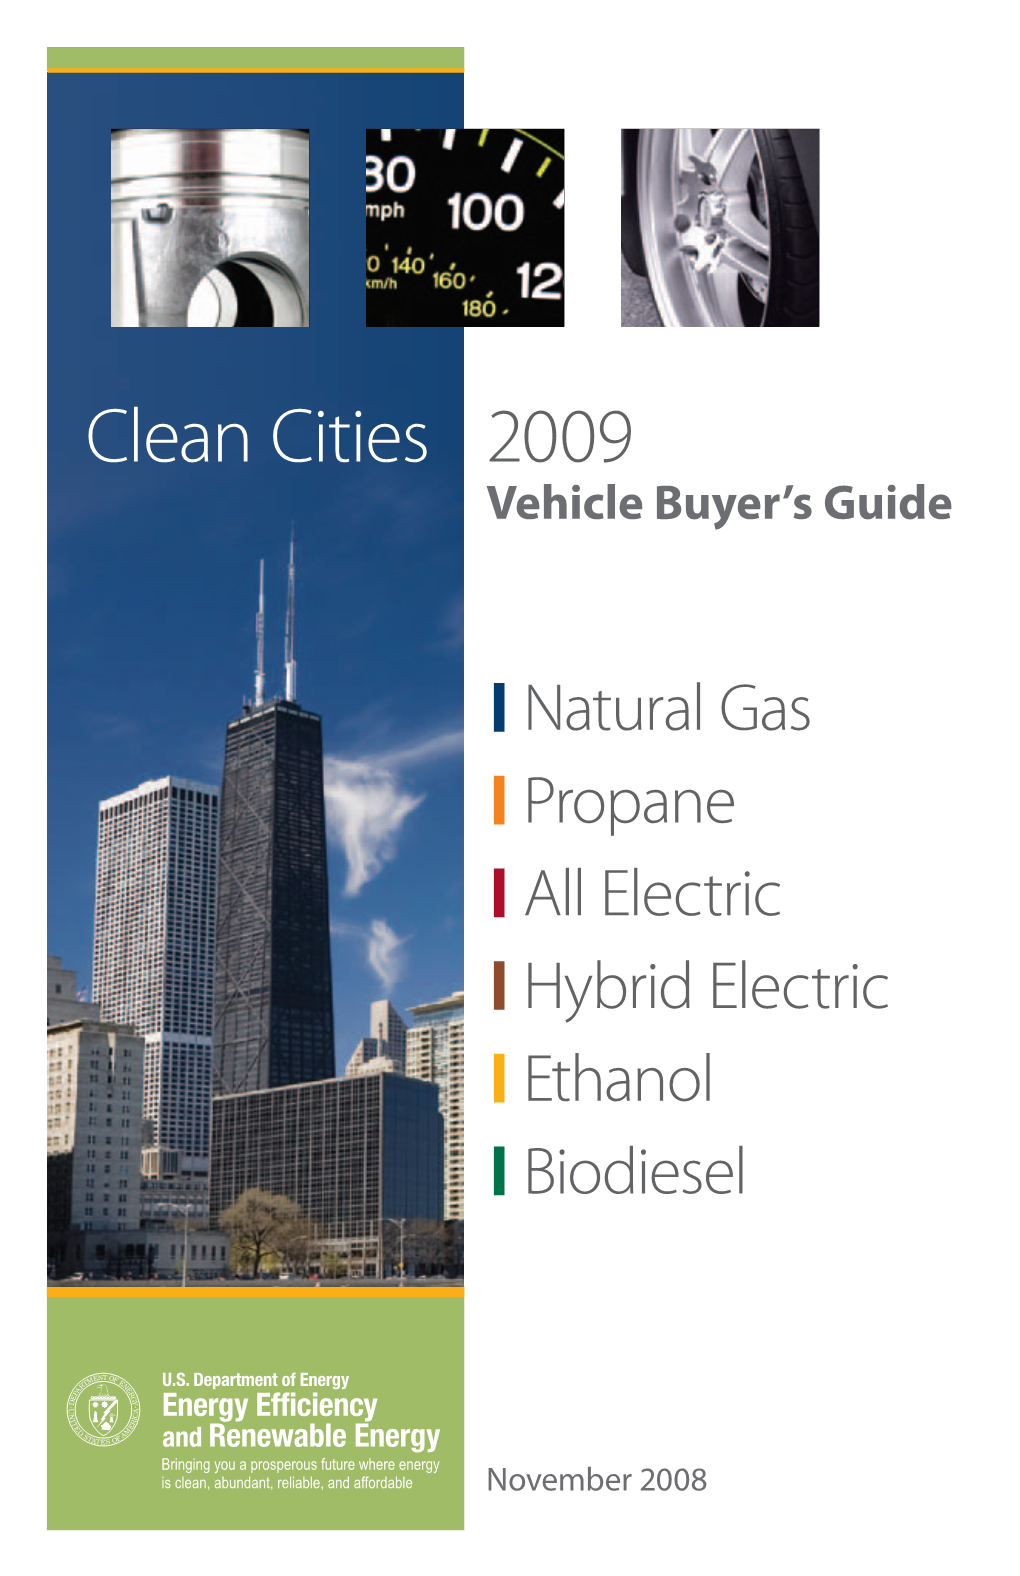 Clean Cities 2009 Vehicle Buyer's Guide